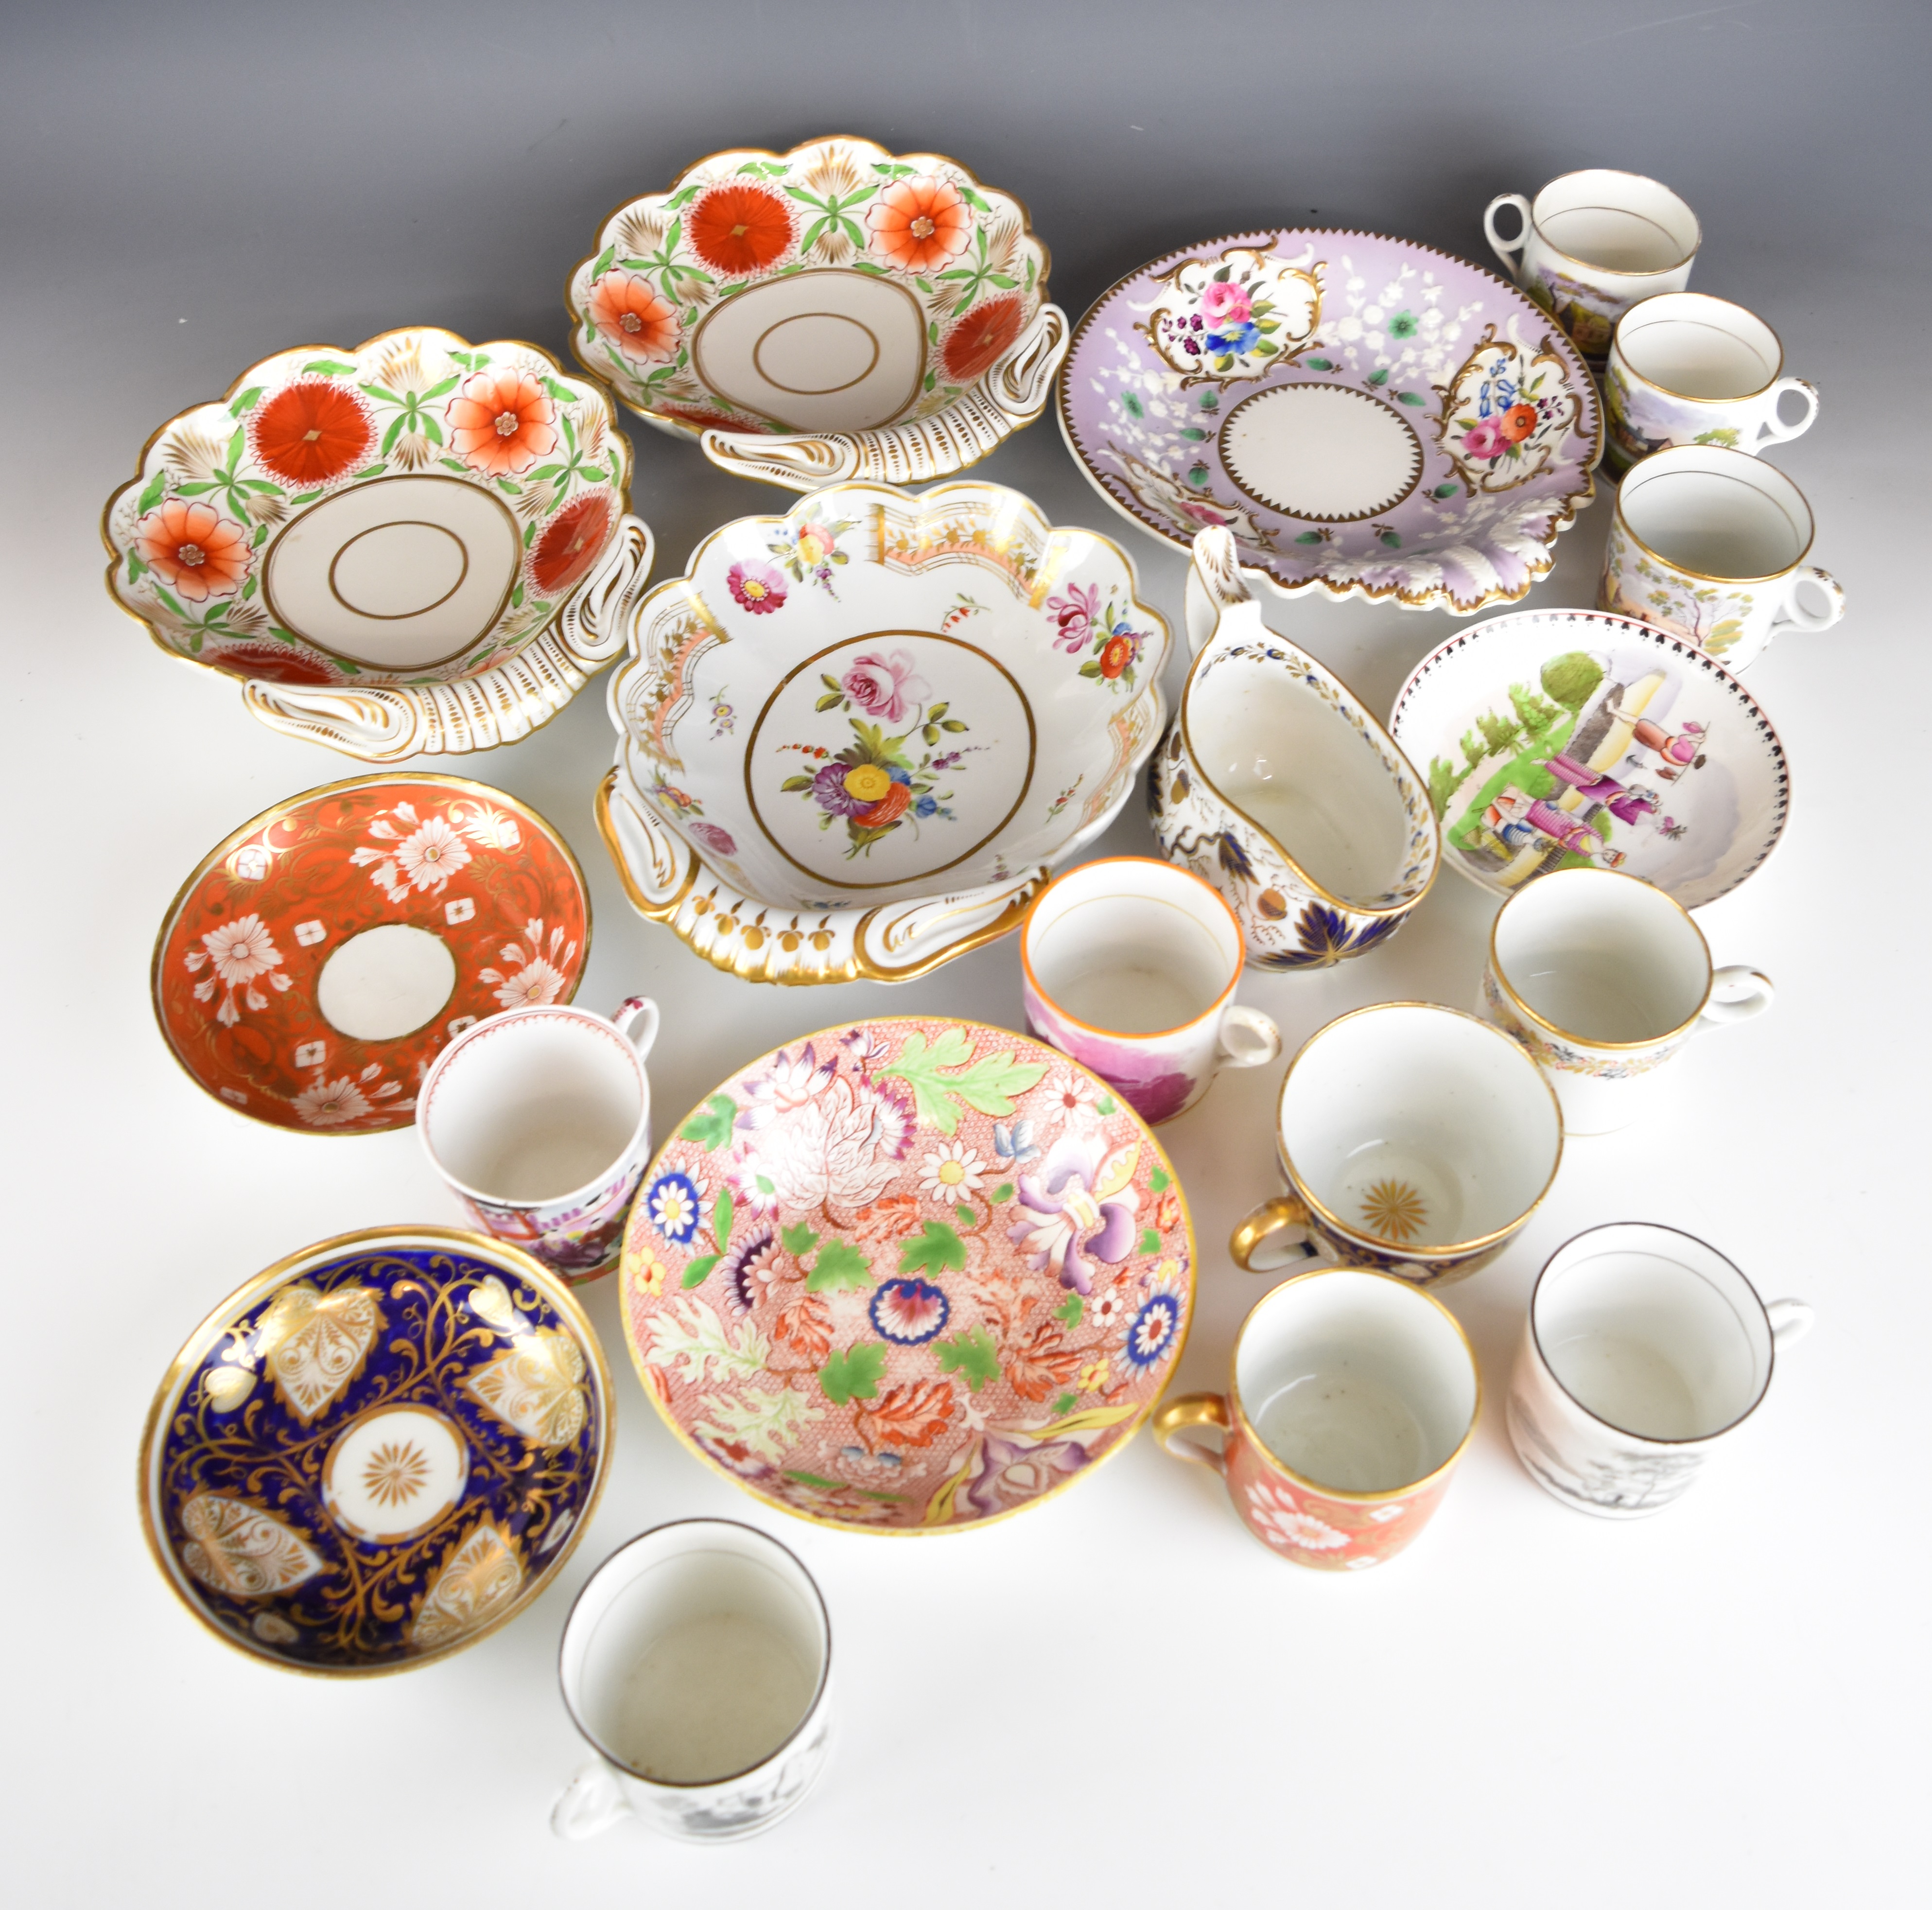 19thC porcelain saucers, dishes, coffee cans and cups including New Hall, Ridgway, bat print - Image 12 of 22